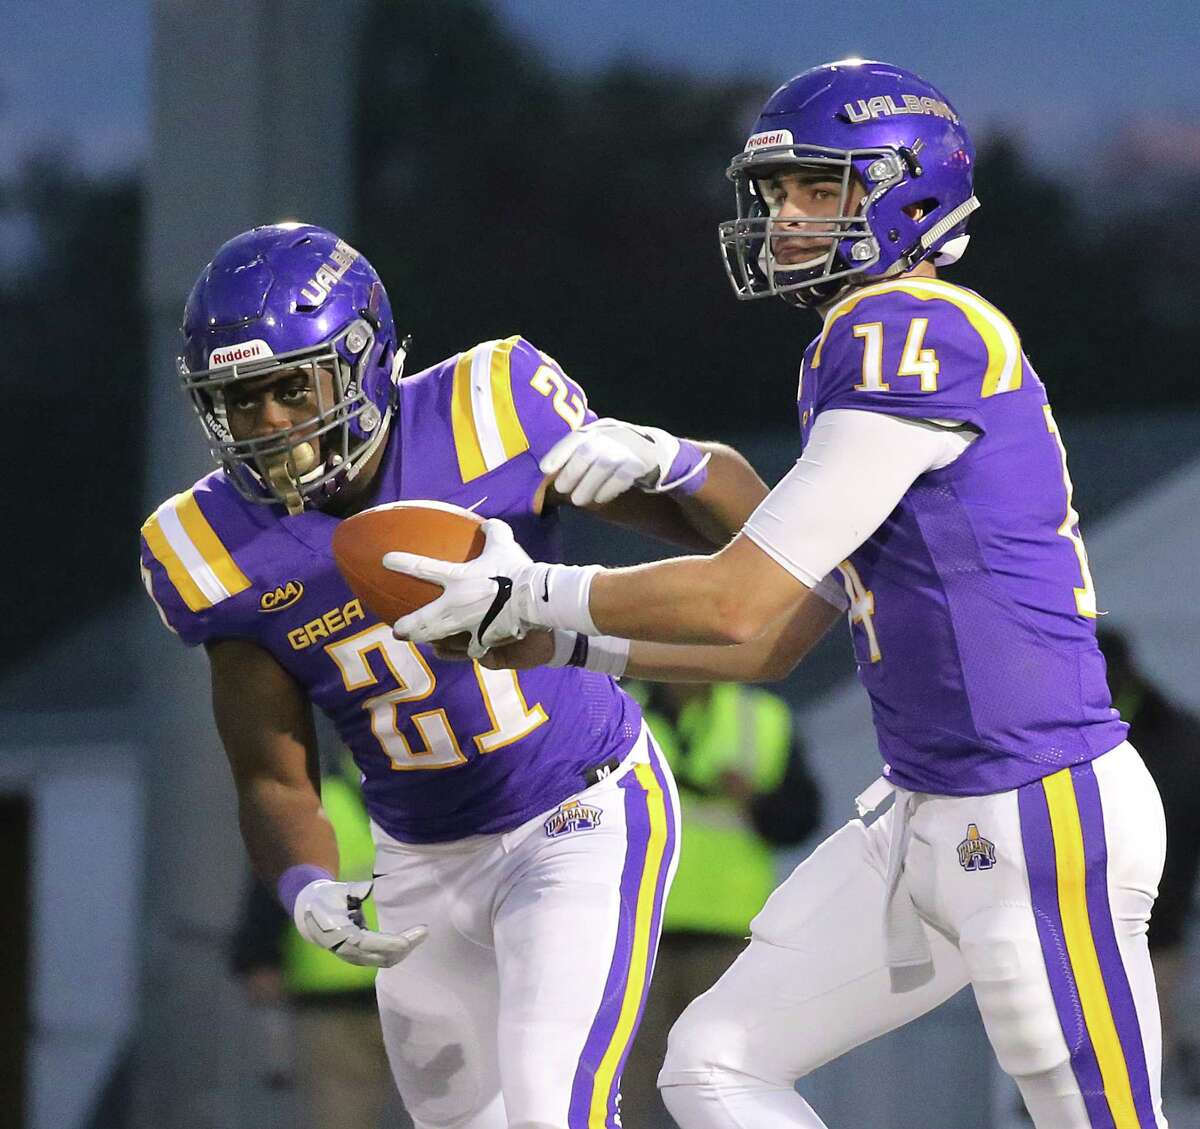 UAlbany quarterback Vince Testaverde hands off to Karl Mofor during the Danes' 56-28 loss to Towson on Saturday, Oct. 20, 2018. (Thomas Palmer / Times Union)